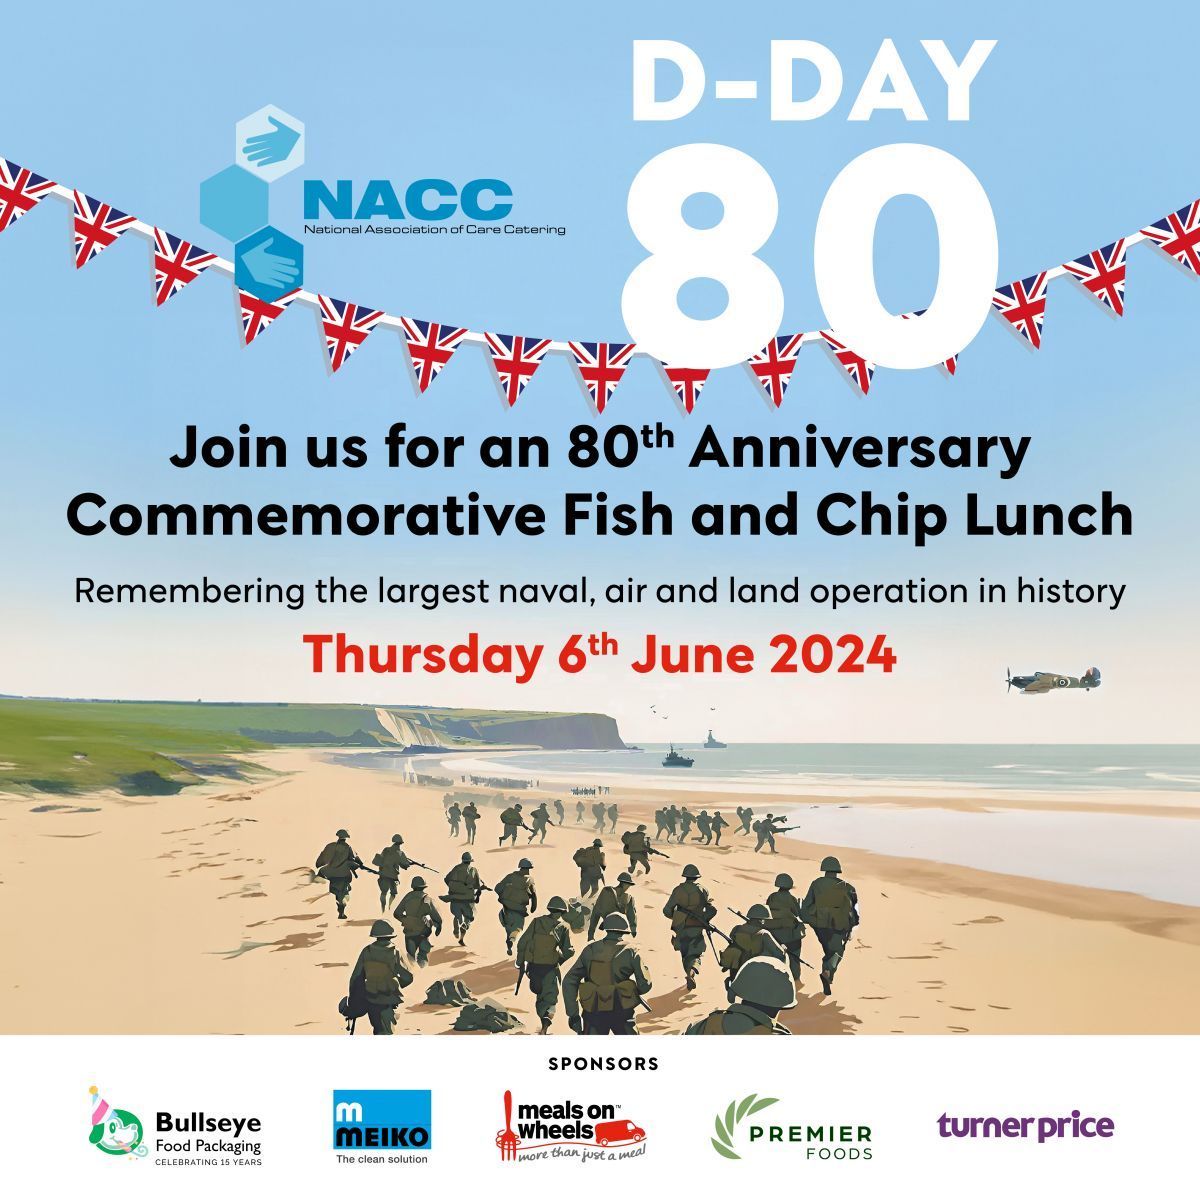 June 6th, 2024, marks a very important date in history, the 80th Anniversary of D-Day. We are supporting the NACC commemorative fish and chip lunch on this day to remember the largest naval, air and land operation in history on Thursday 6th June 2024. Will you be taking part?